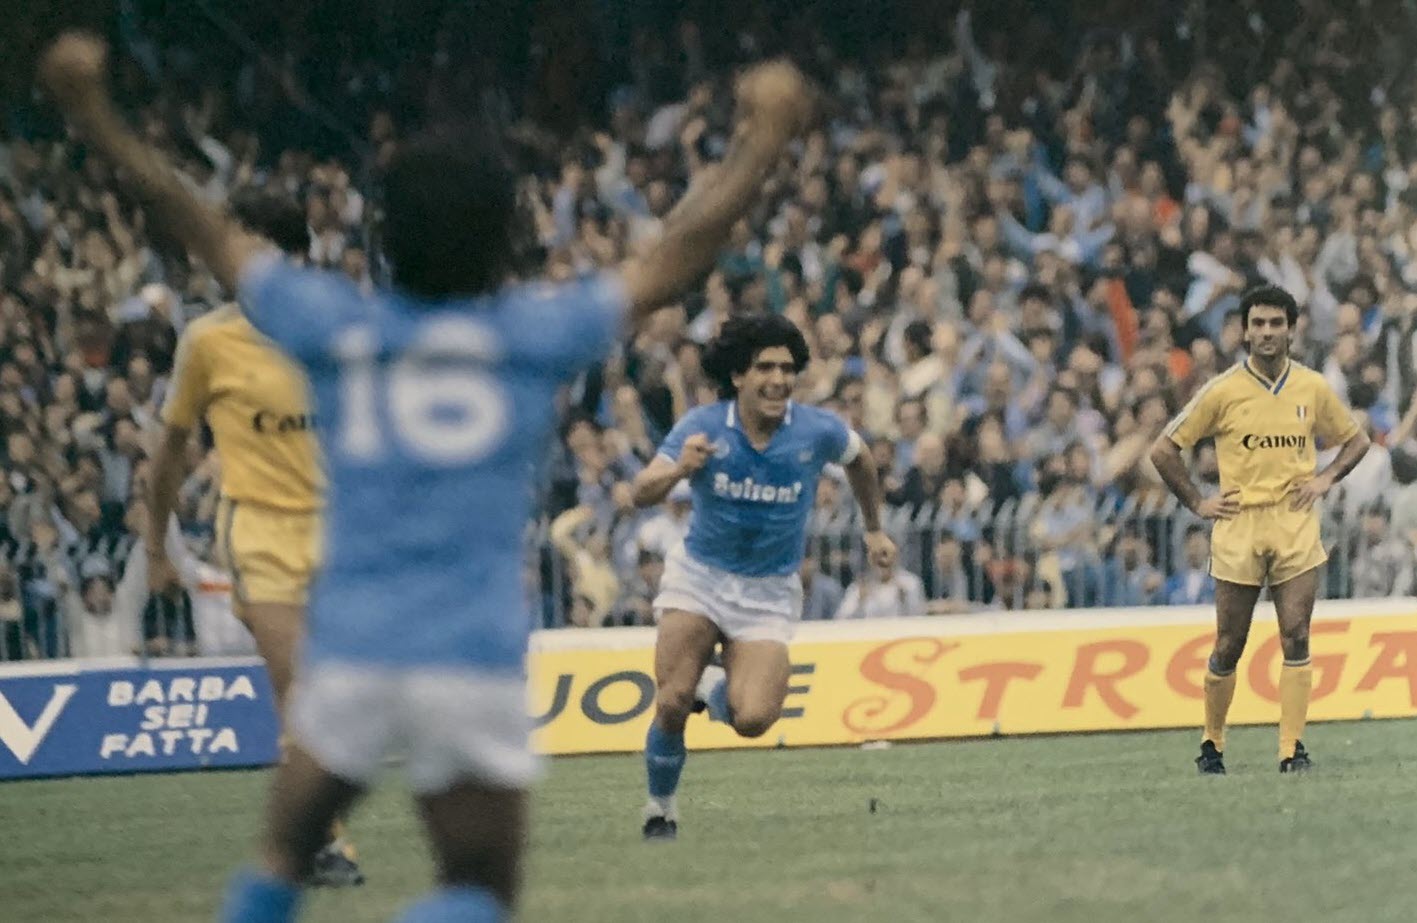 October 20, 1985, marked an ideal passing of the Scudetto baton as Napoli received Verona at the San Paolo Stadium and disposed of them by a 5-0 score